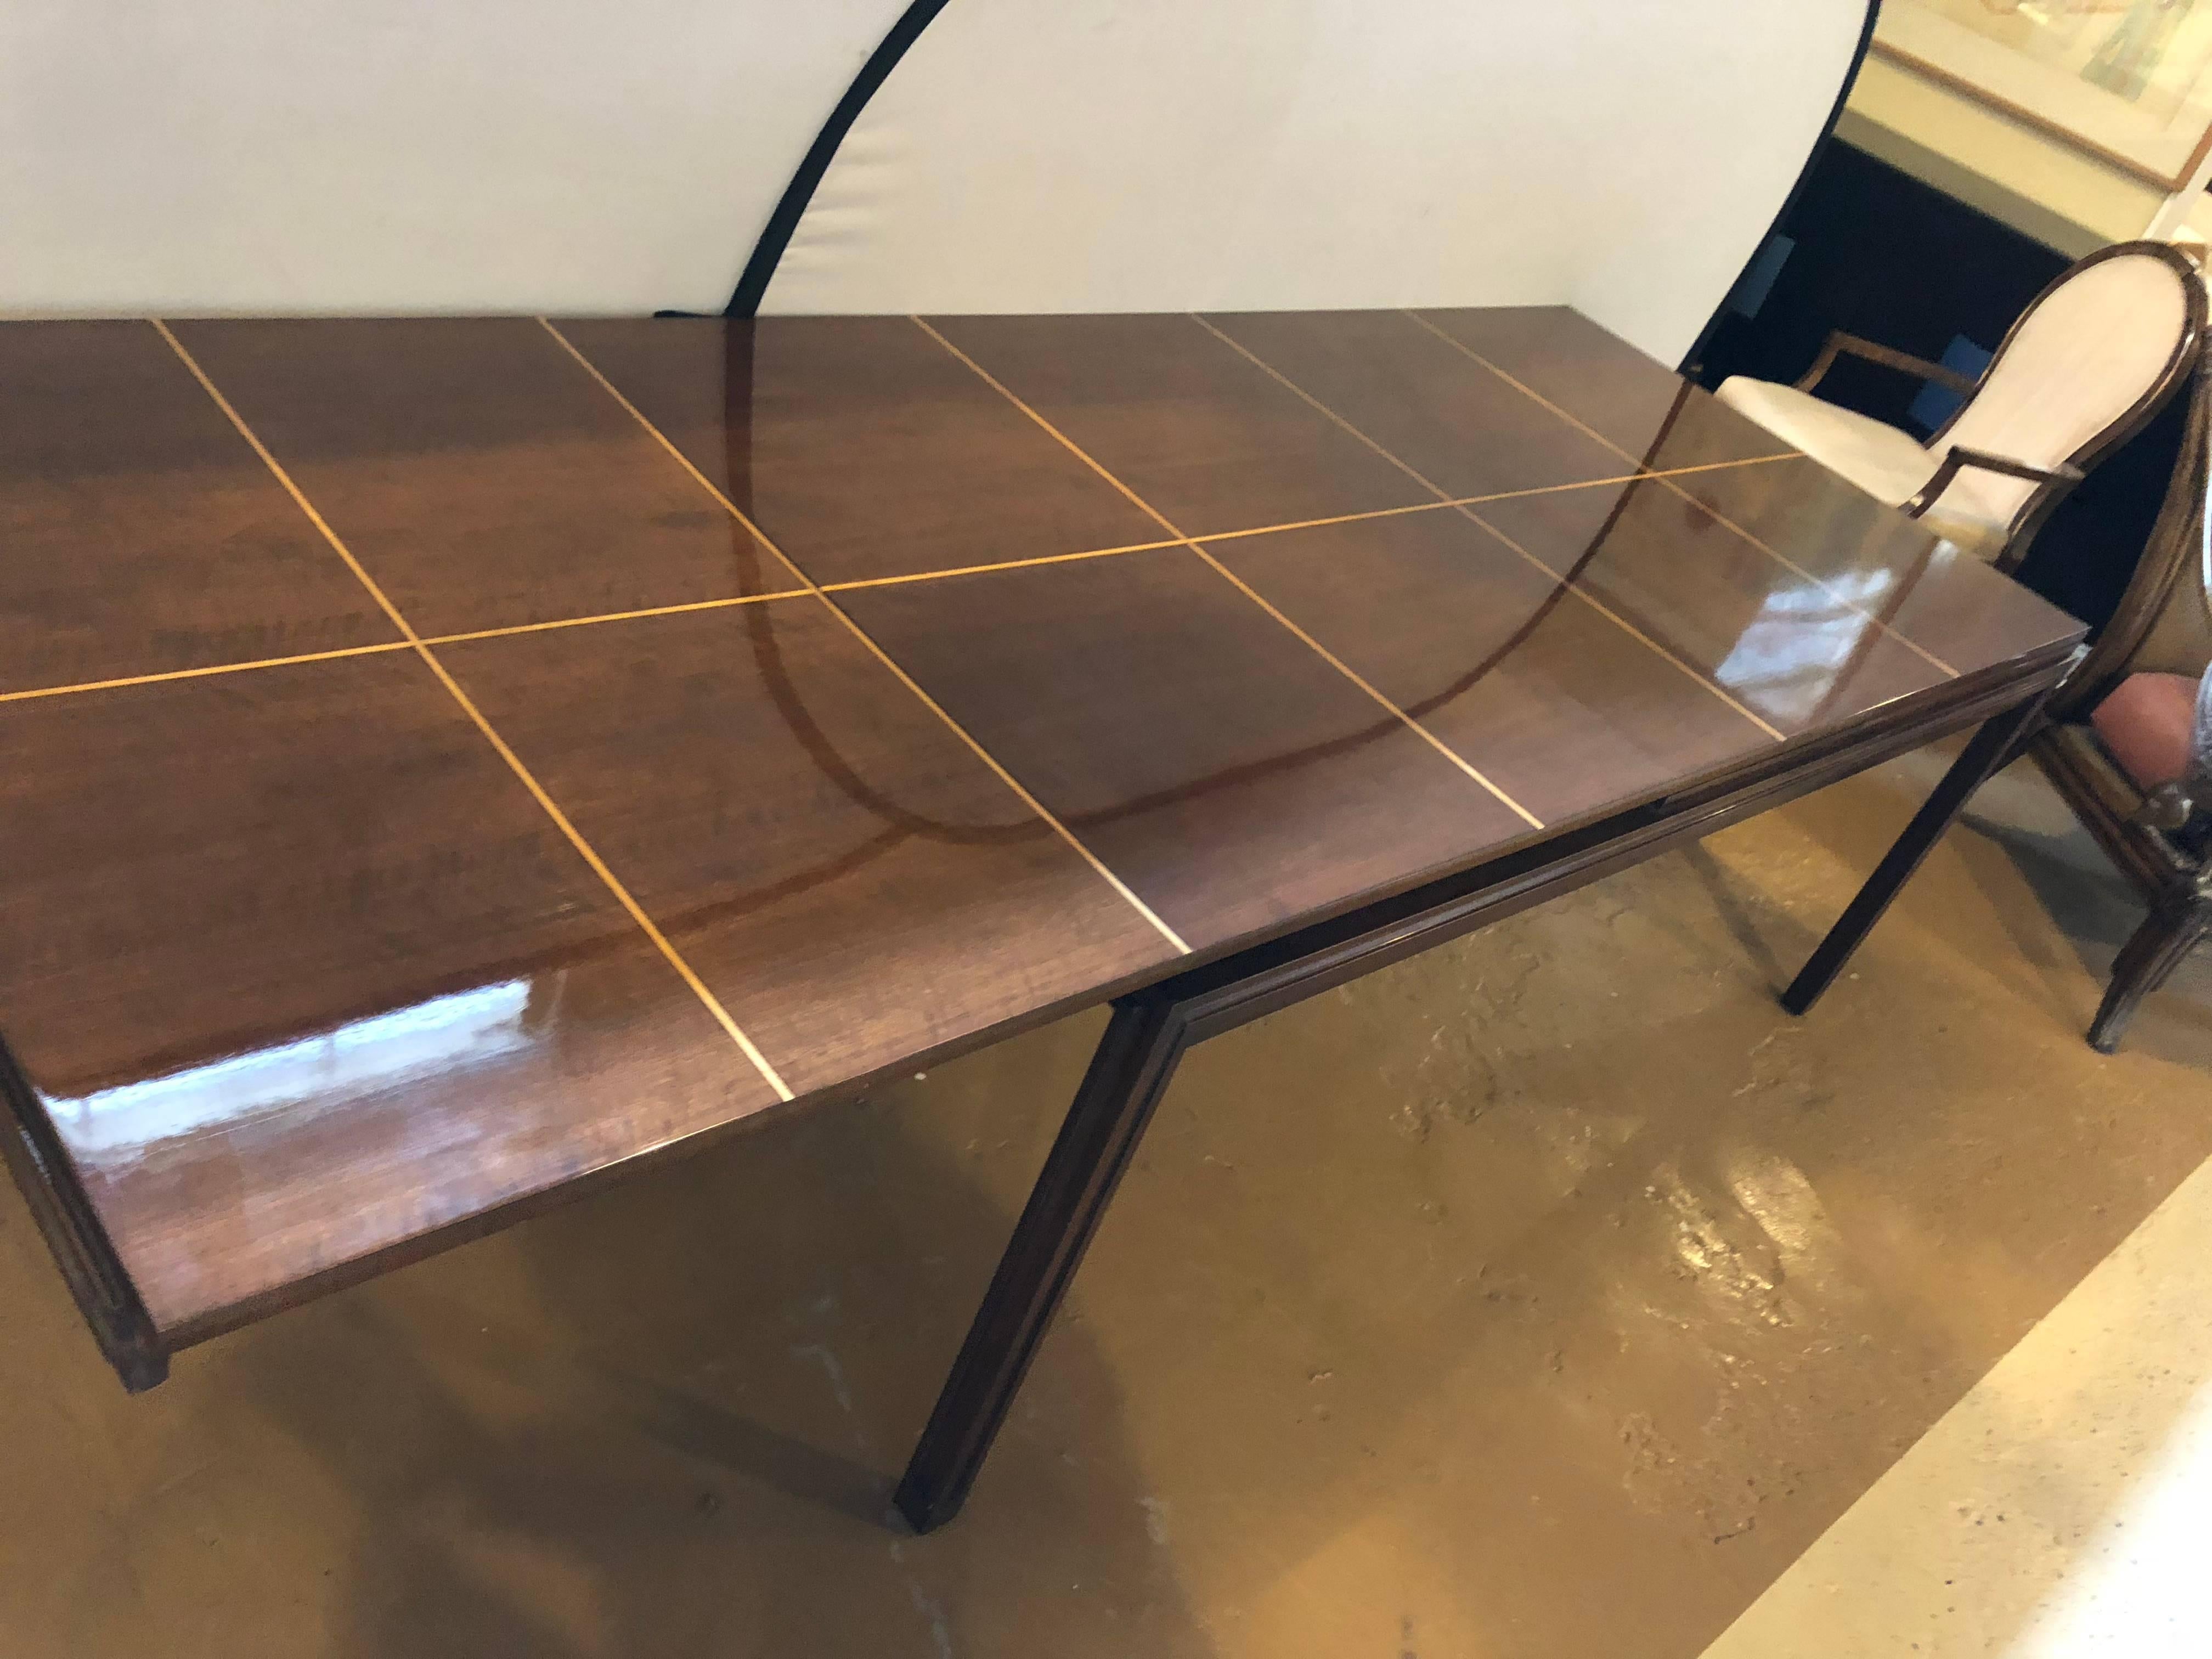 A fine Tommi Parzinger dining table having a lacquered mahogany with satinwood inlaid top. This table is wonderfully constructed by this highly sought after designer and can extend to three different sizes when one or both pull-out leaves are open.